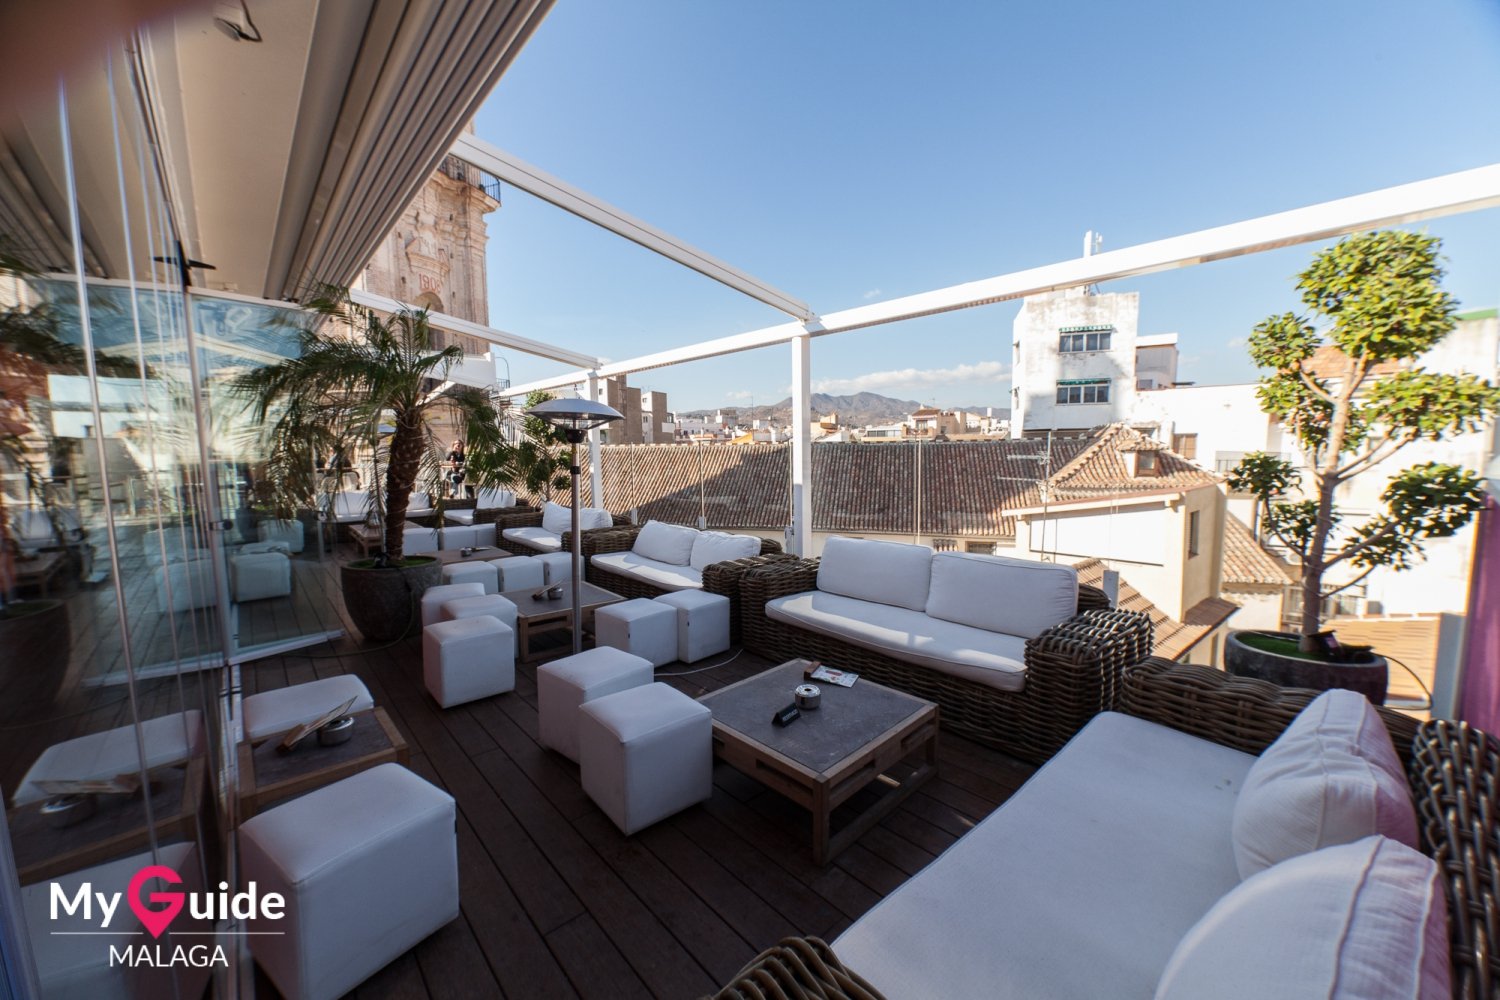 All of Malaga's rooftop bars